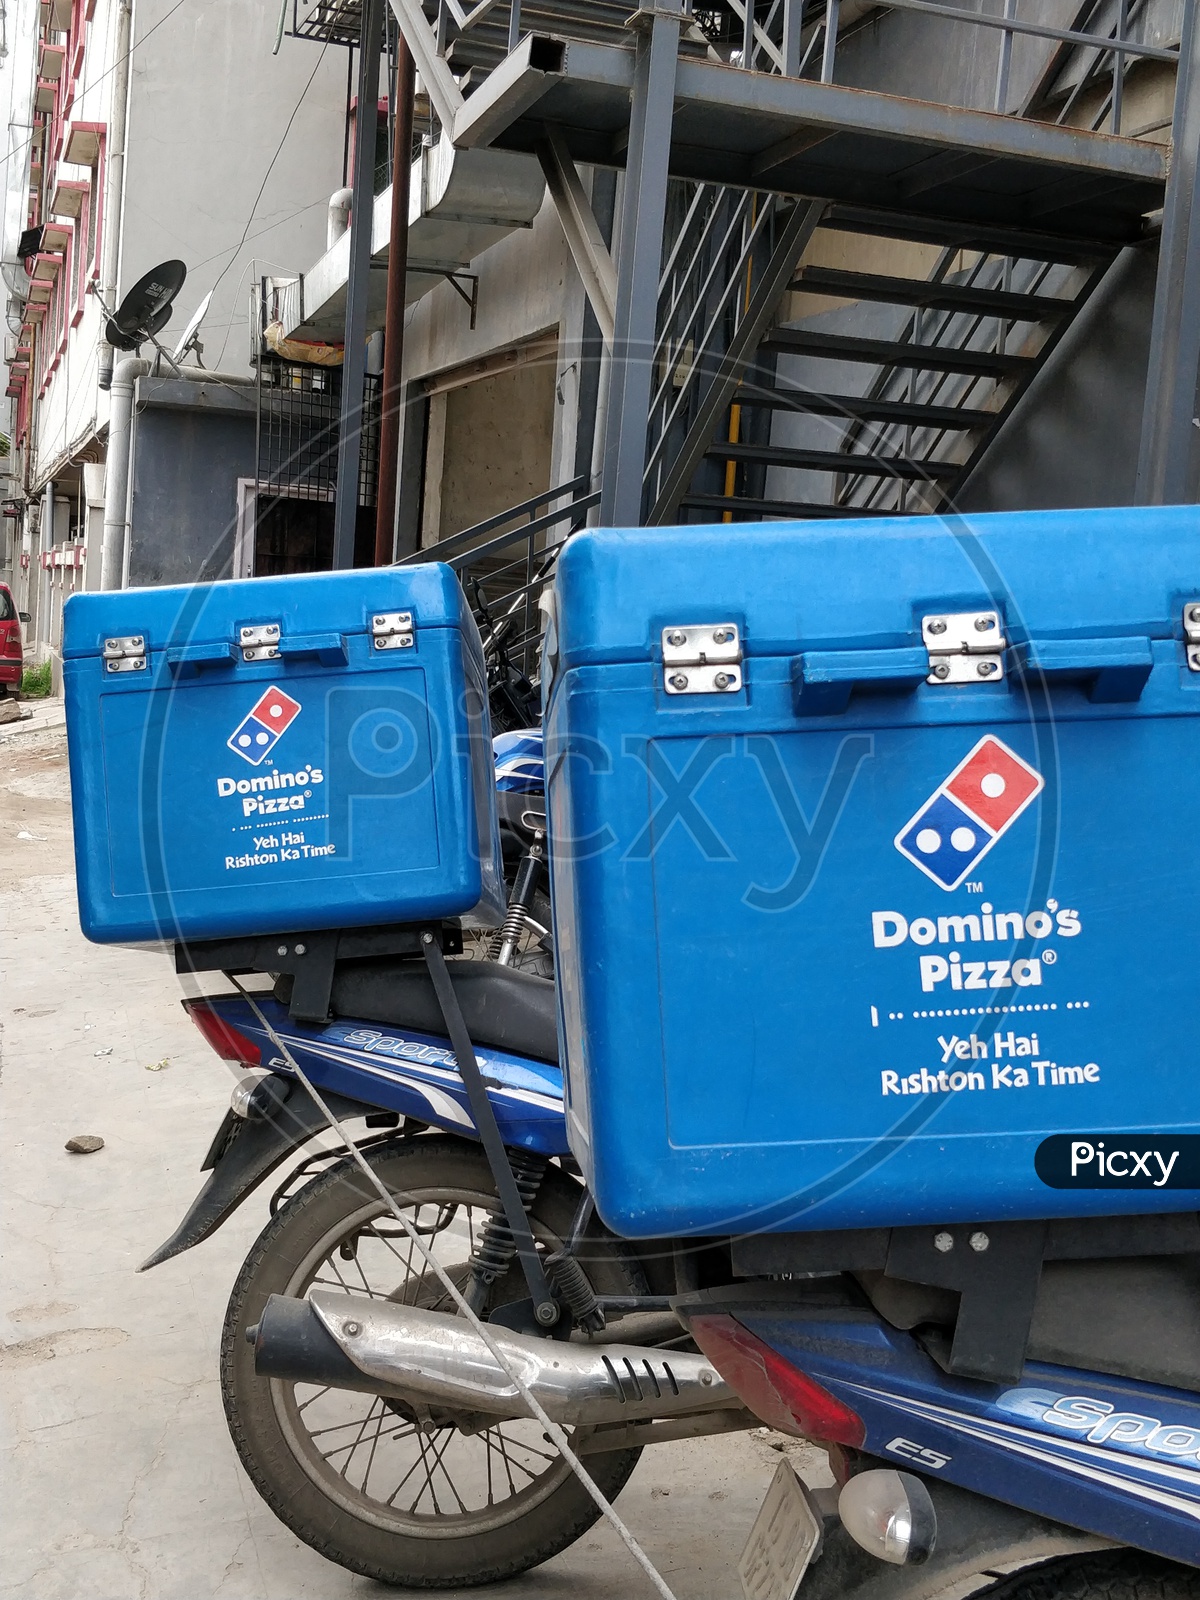 Domino's pizza delivery service boxes mounted on a bike/ motorcycle